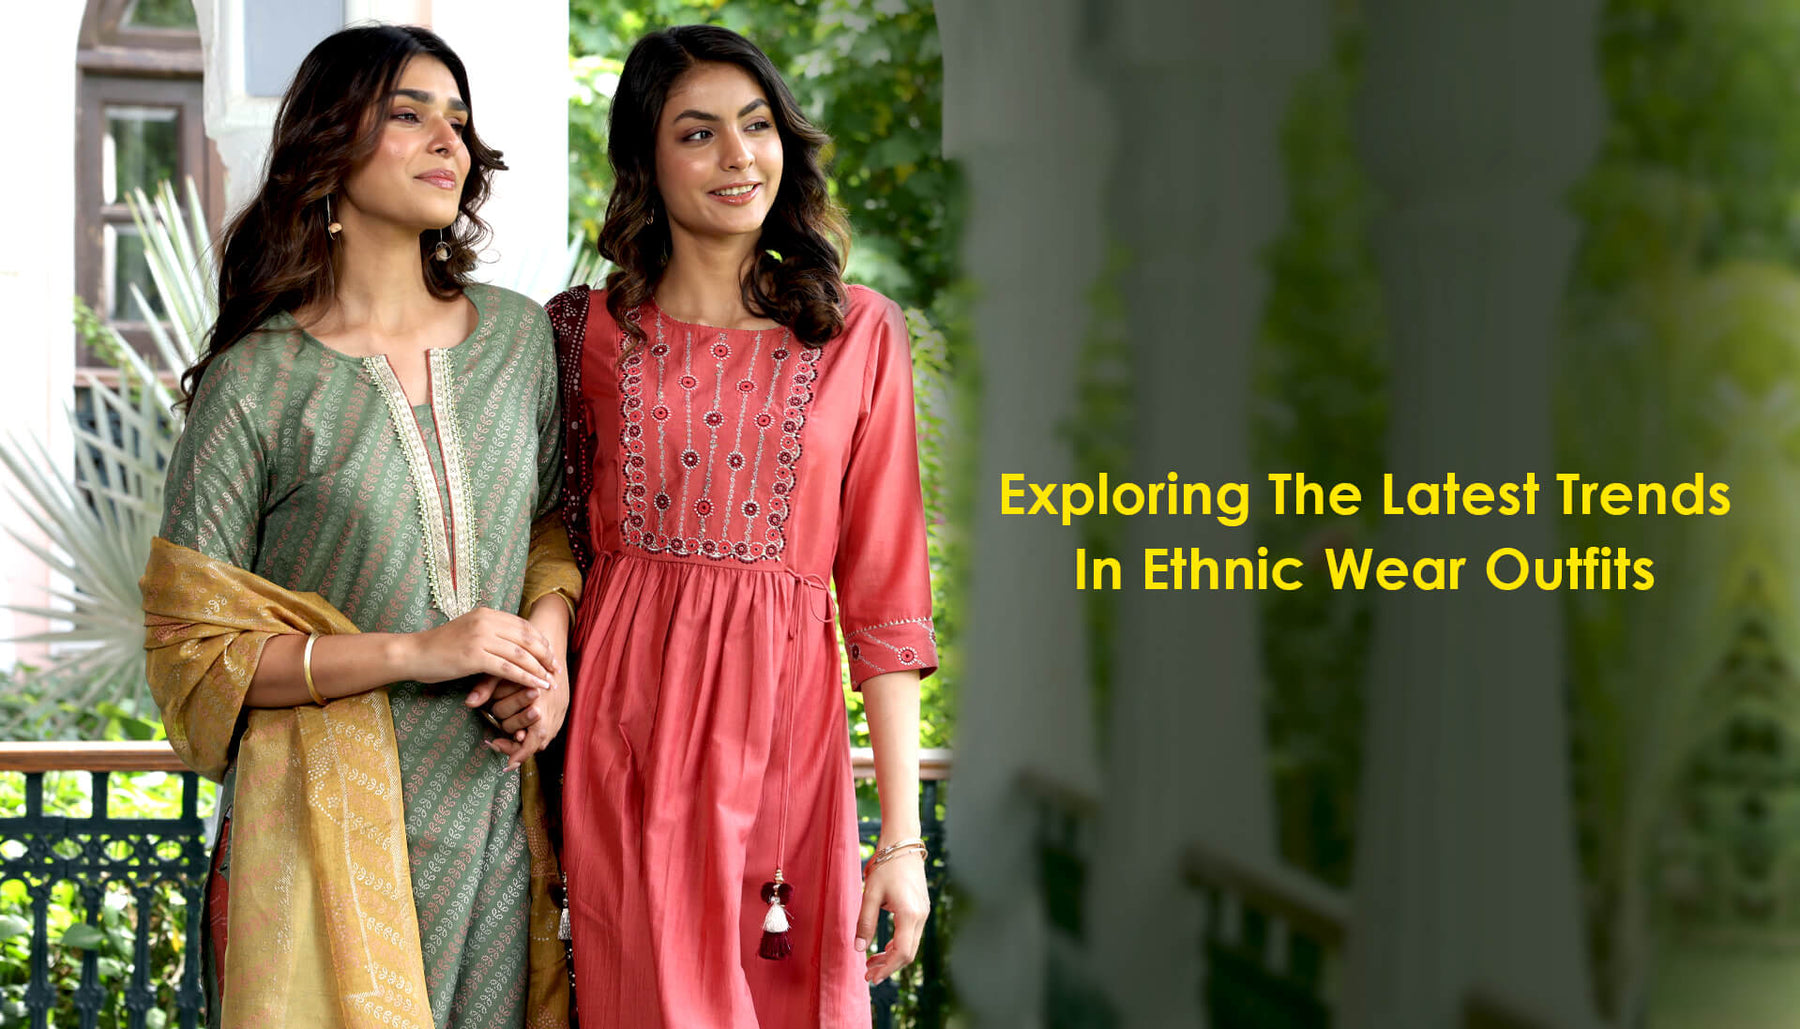 Exploring The Latest Trends In Ethnic Wear Outfits